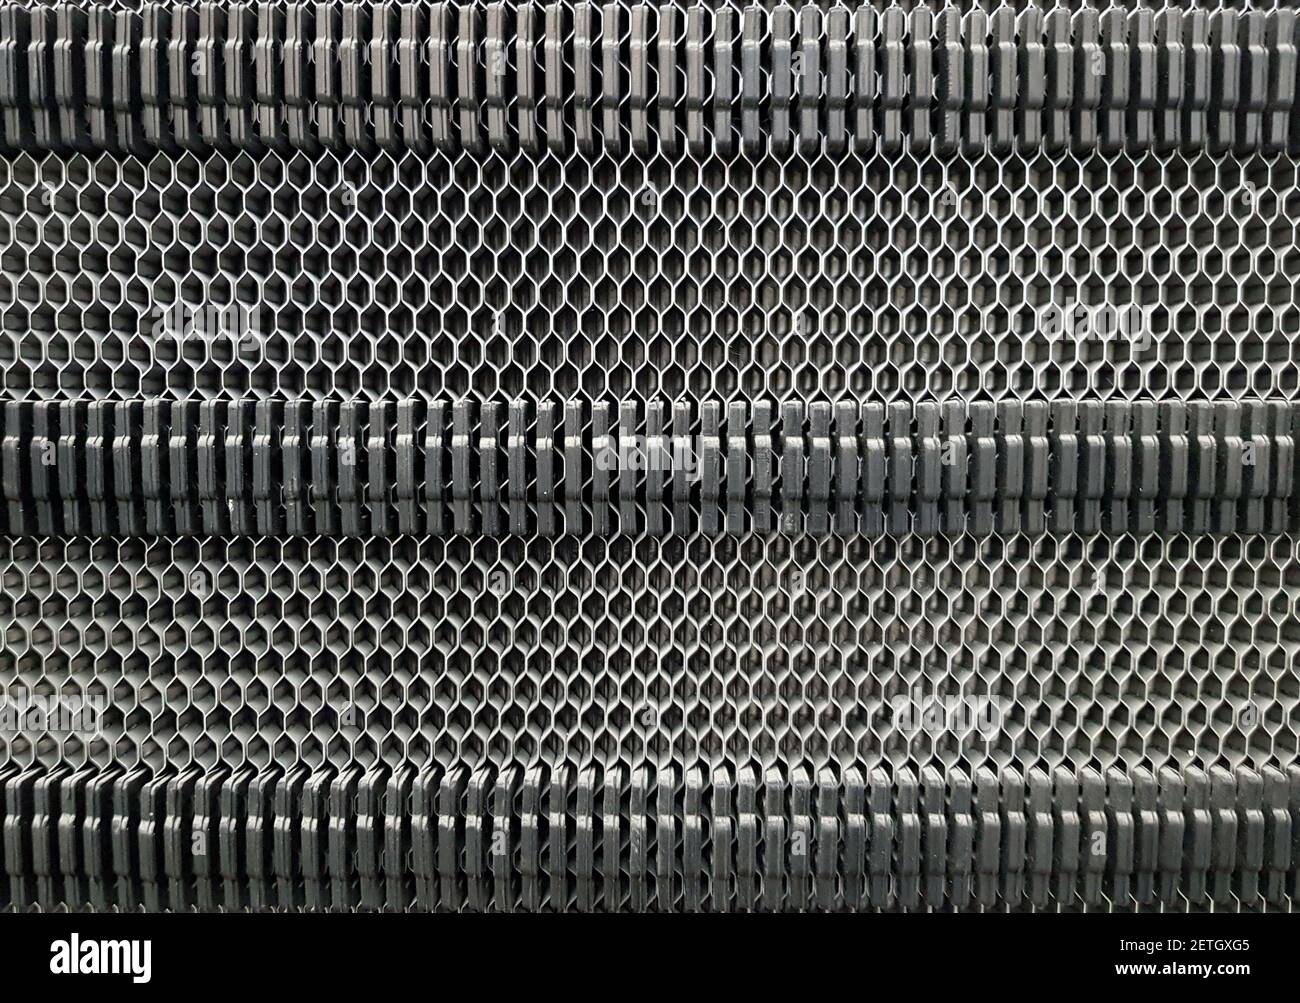 Background of the plate heat exchanger radiator grille Stock Photo